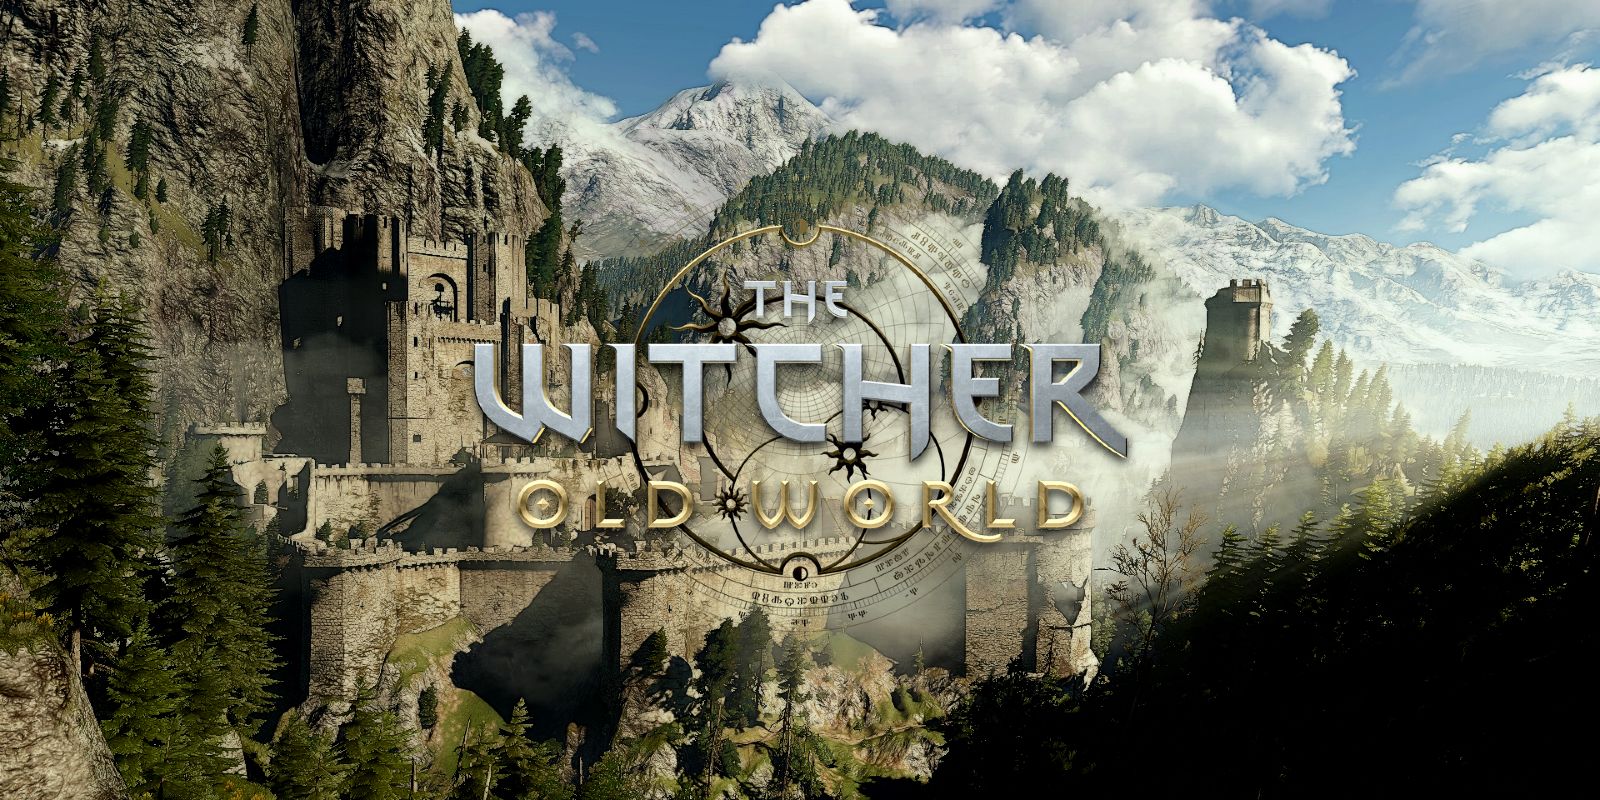 How The Witcher Old World is Different from the Video Games